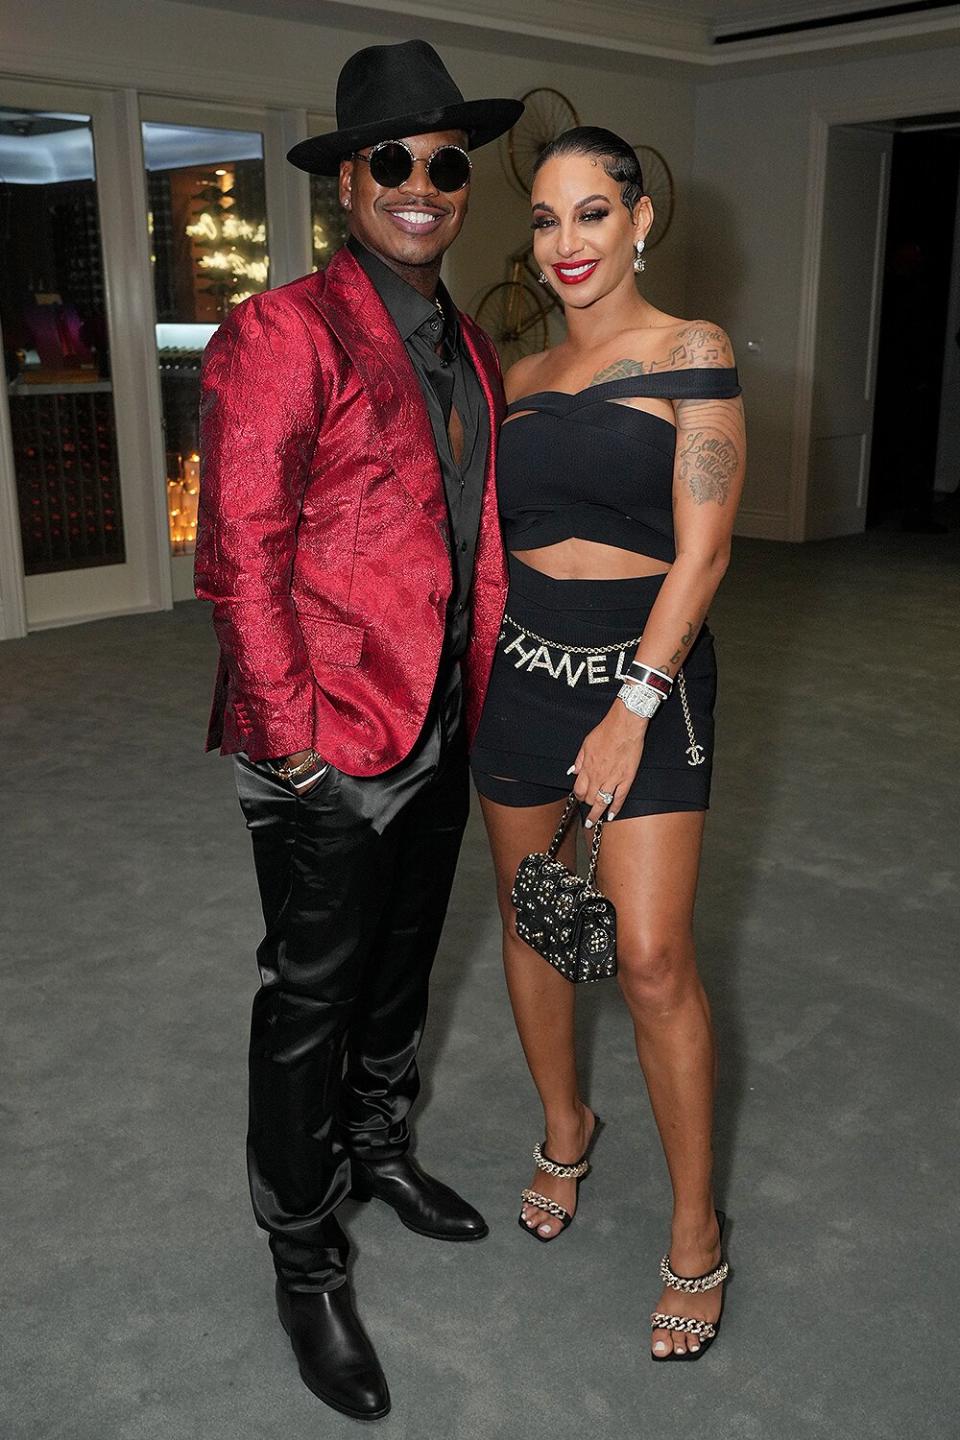 Ne-Yo and Crystal Smith attend Sean "Diddy" Combs celebrates BET Lifetime Achievement after party powered by Meta, Ciroc Premium Vodka and DeLeon Tequila on June 26, 2022 in Los Angeles, California.